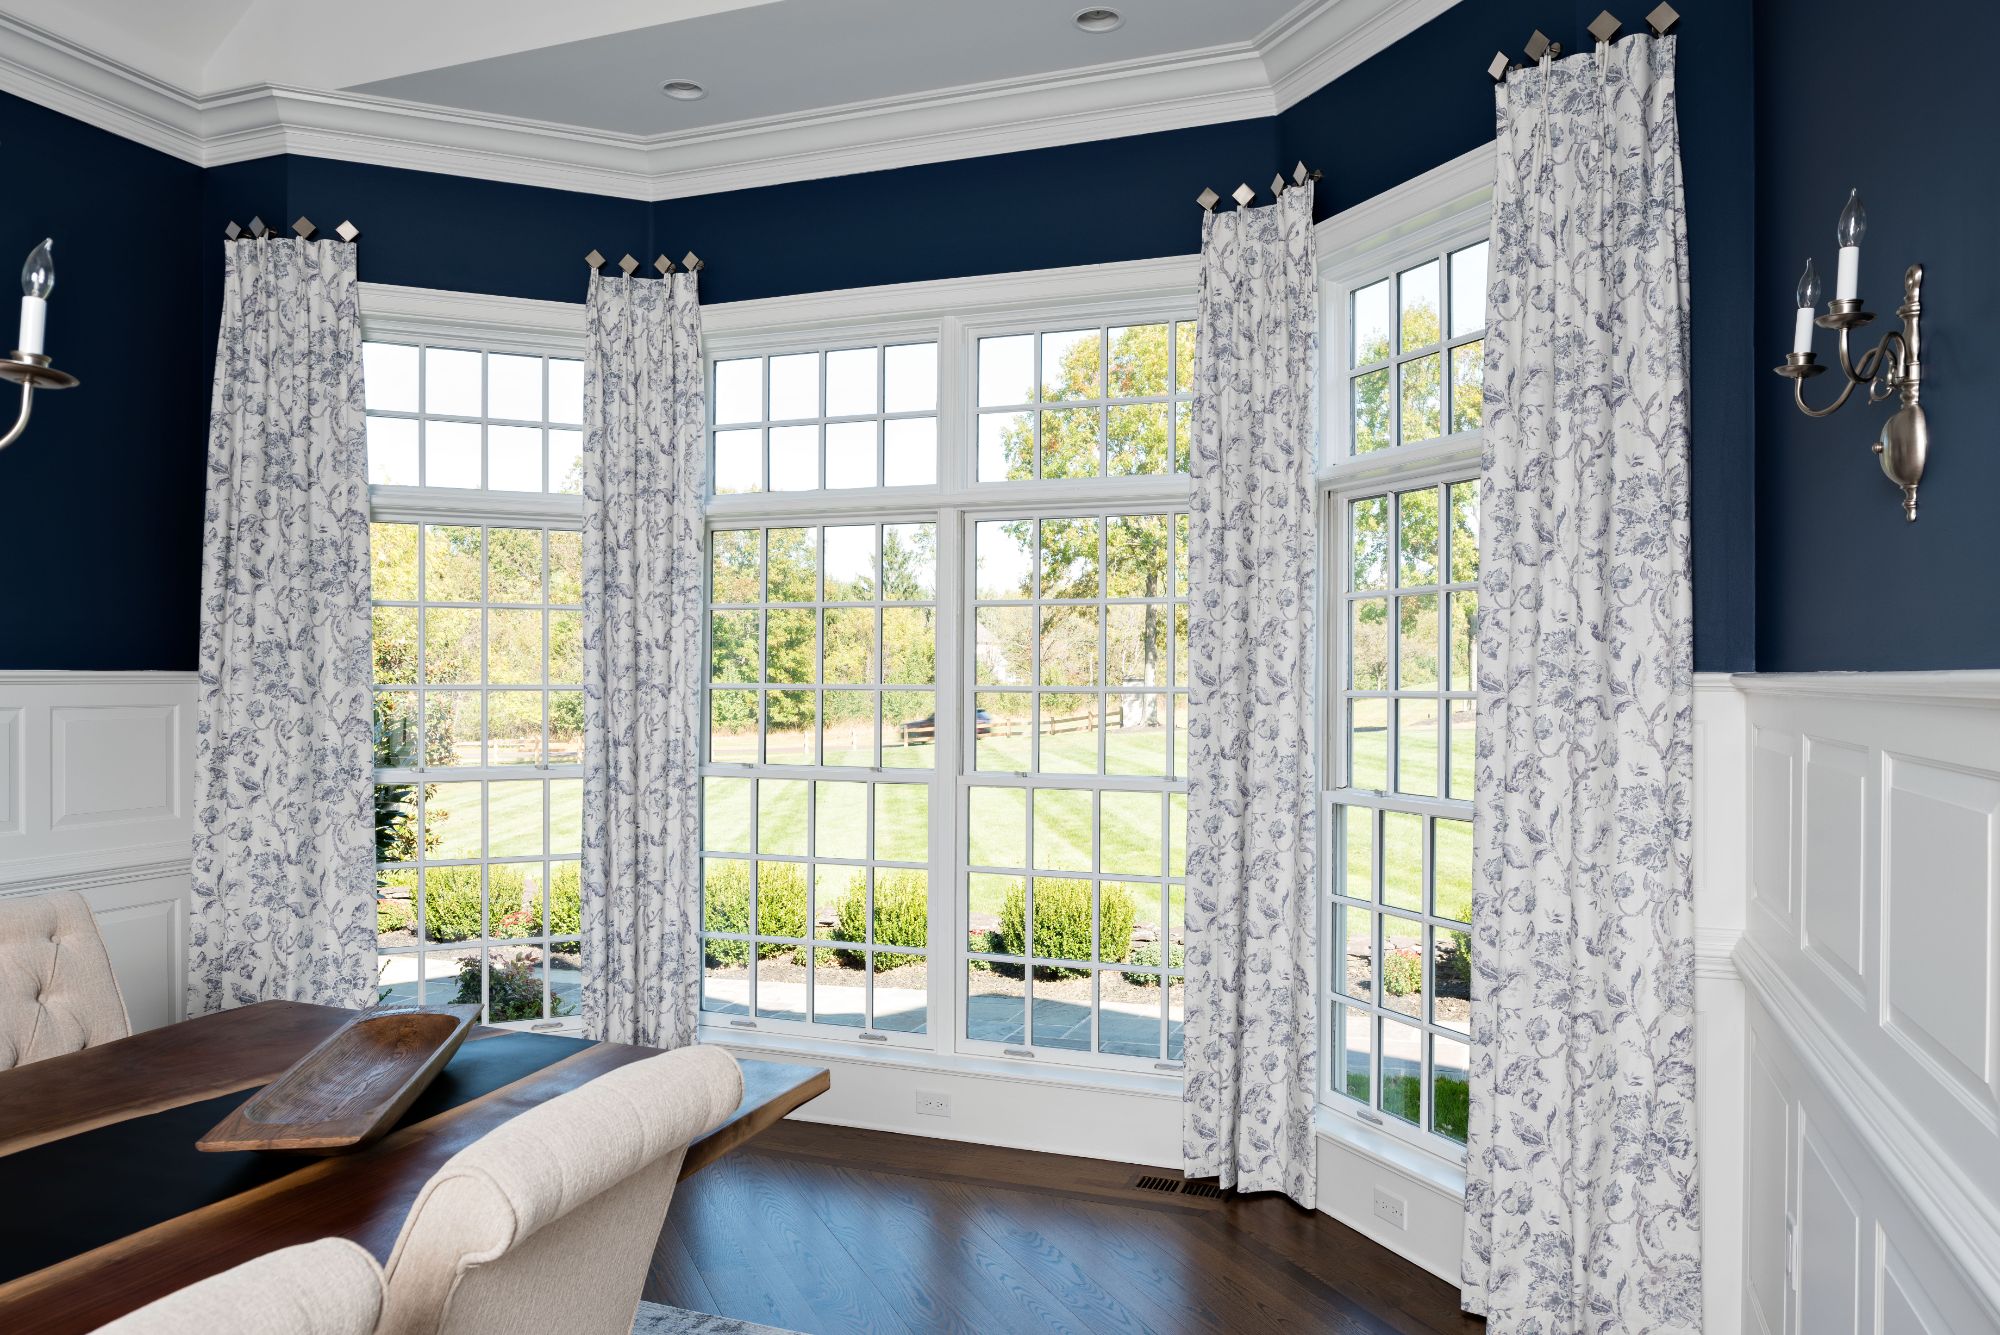 The benefits of window treatments